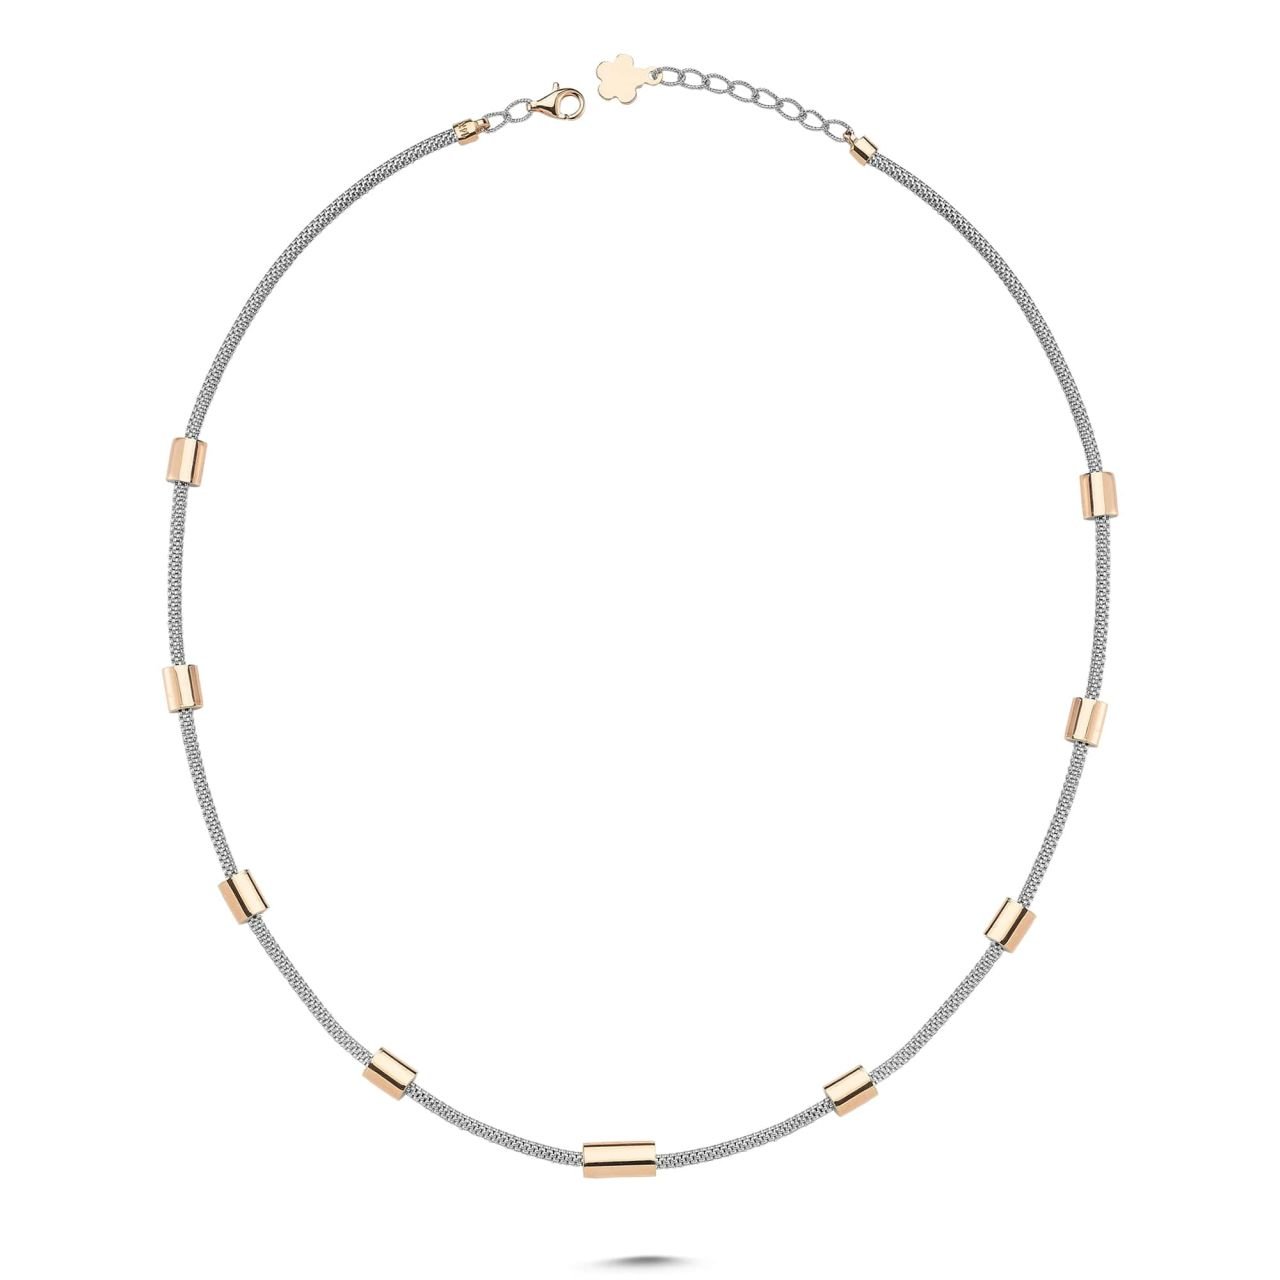 TSM 2106 is 7.70g Gold Necklace